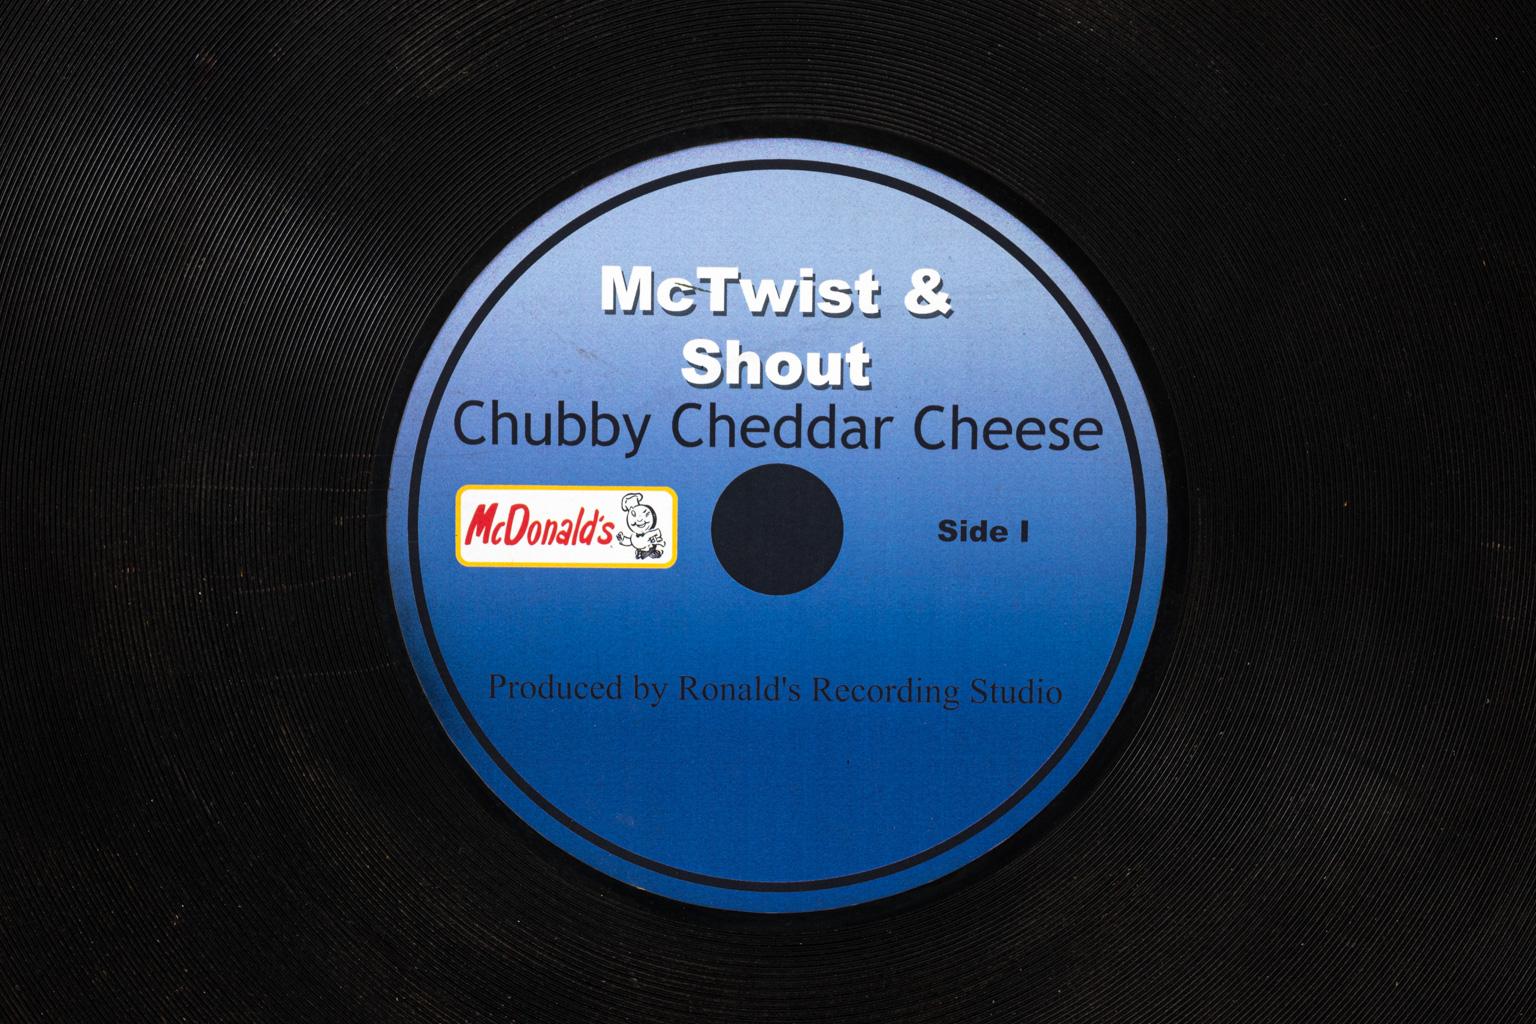 McTwist and shout chubby cheddar cheese advertising record made of wood and paper, circa 1960s. 